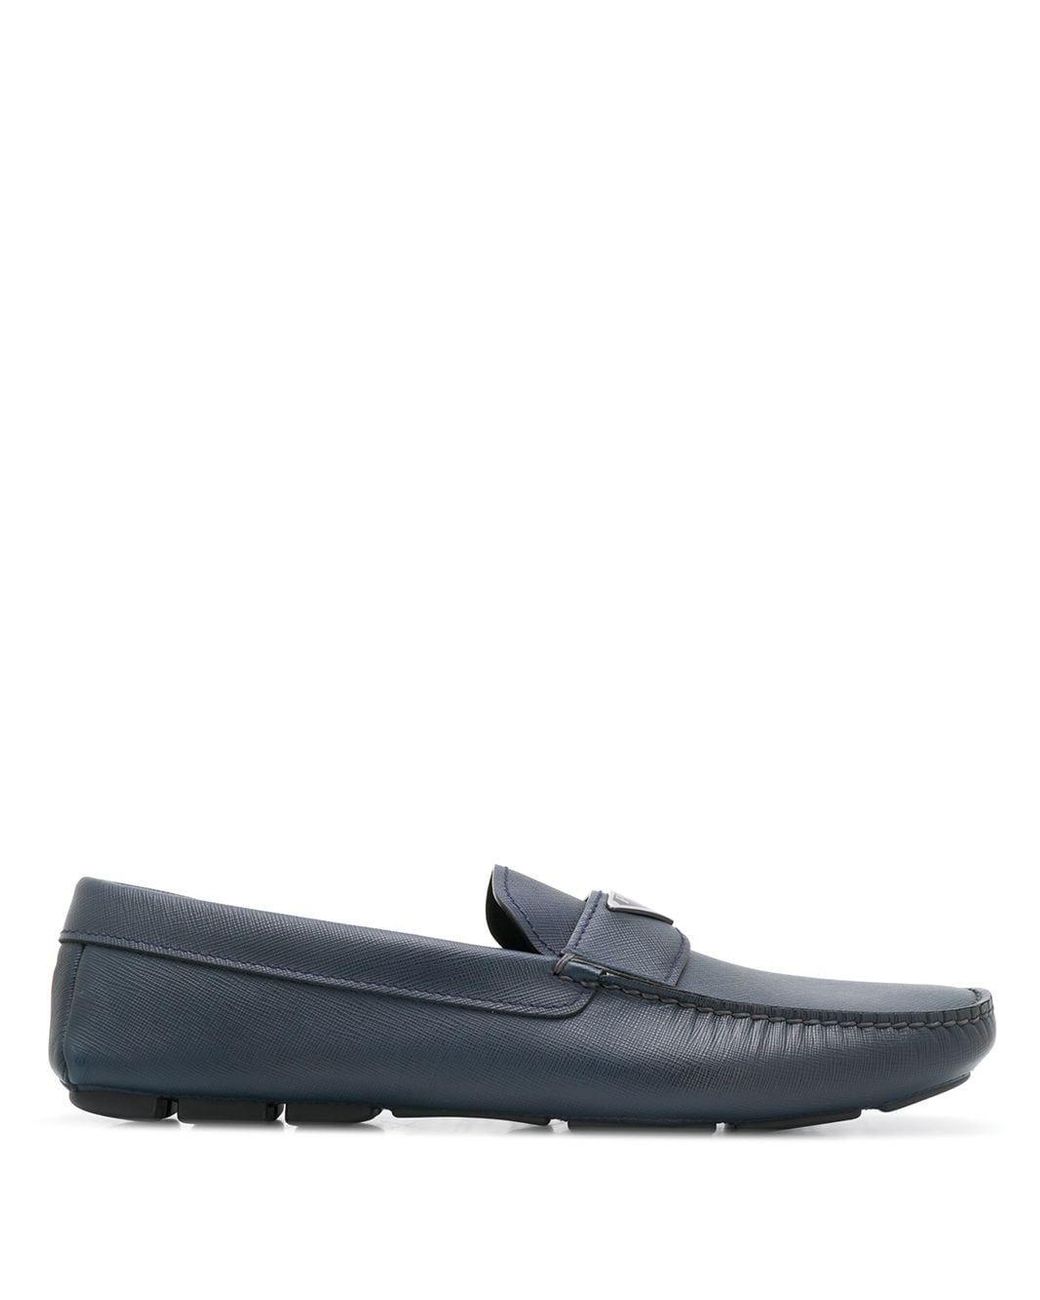 Prada Leather Loafers in Blue for Men - Lyst